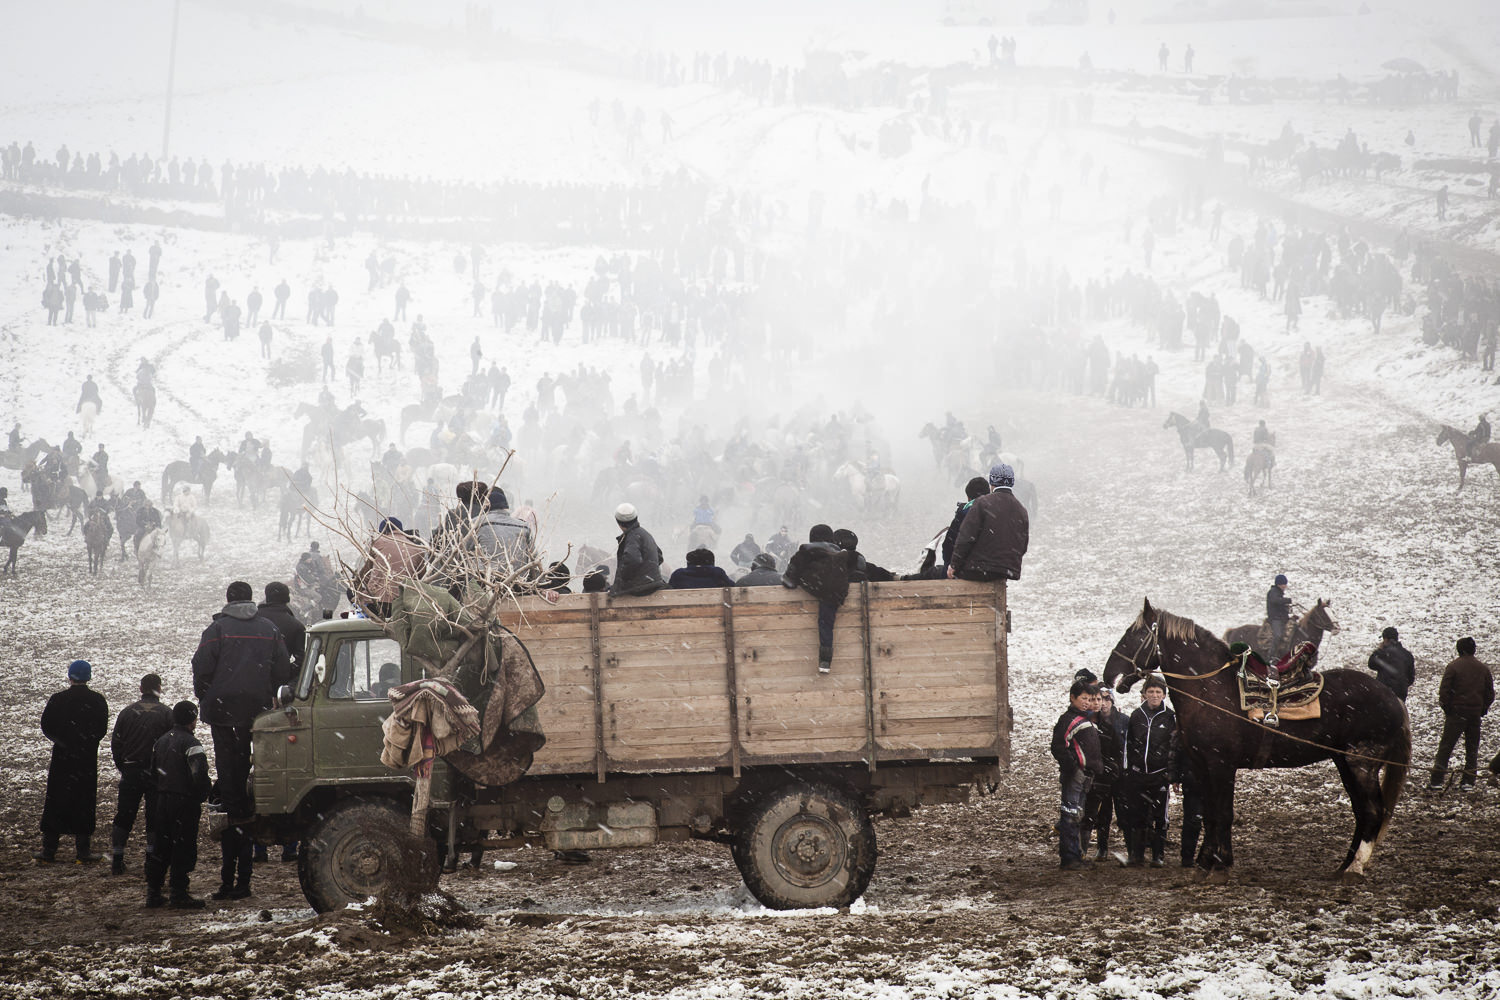  Spectators rally around a snowy buzkashi field. The truck in the foreground is both the prize truck, the announcer's truck and the holding pen for goats (buz) for the game. 